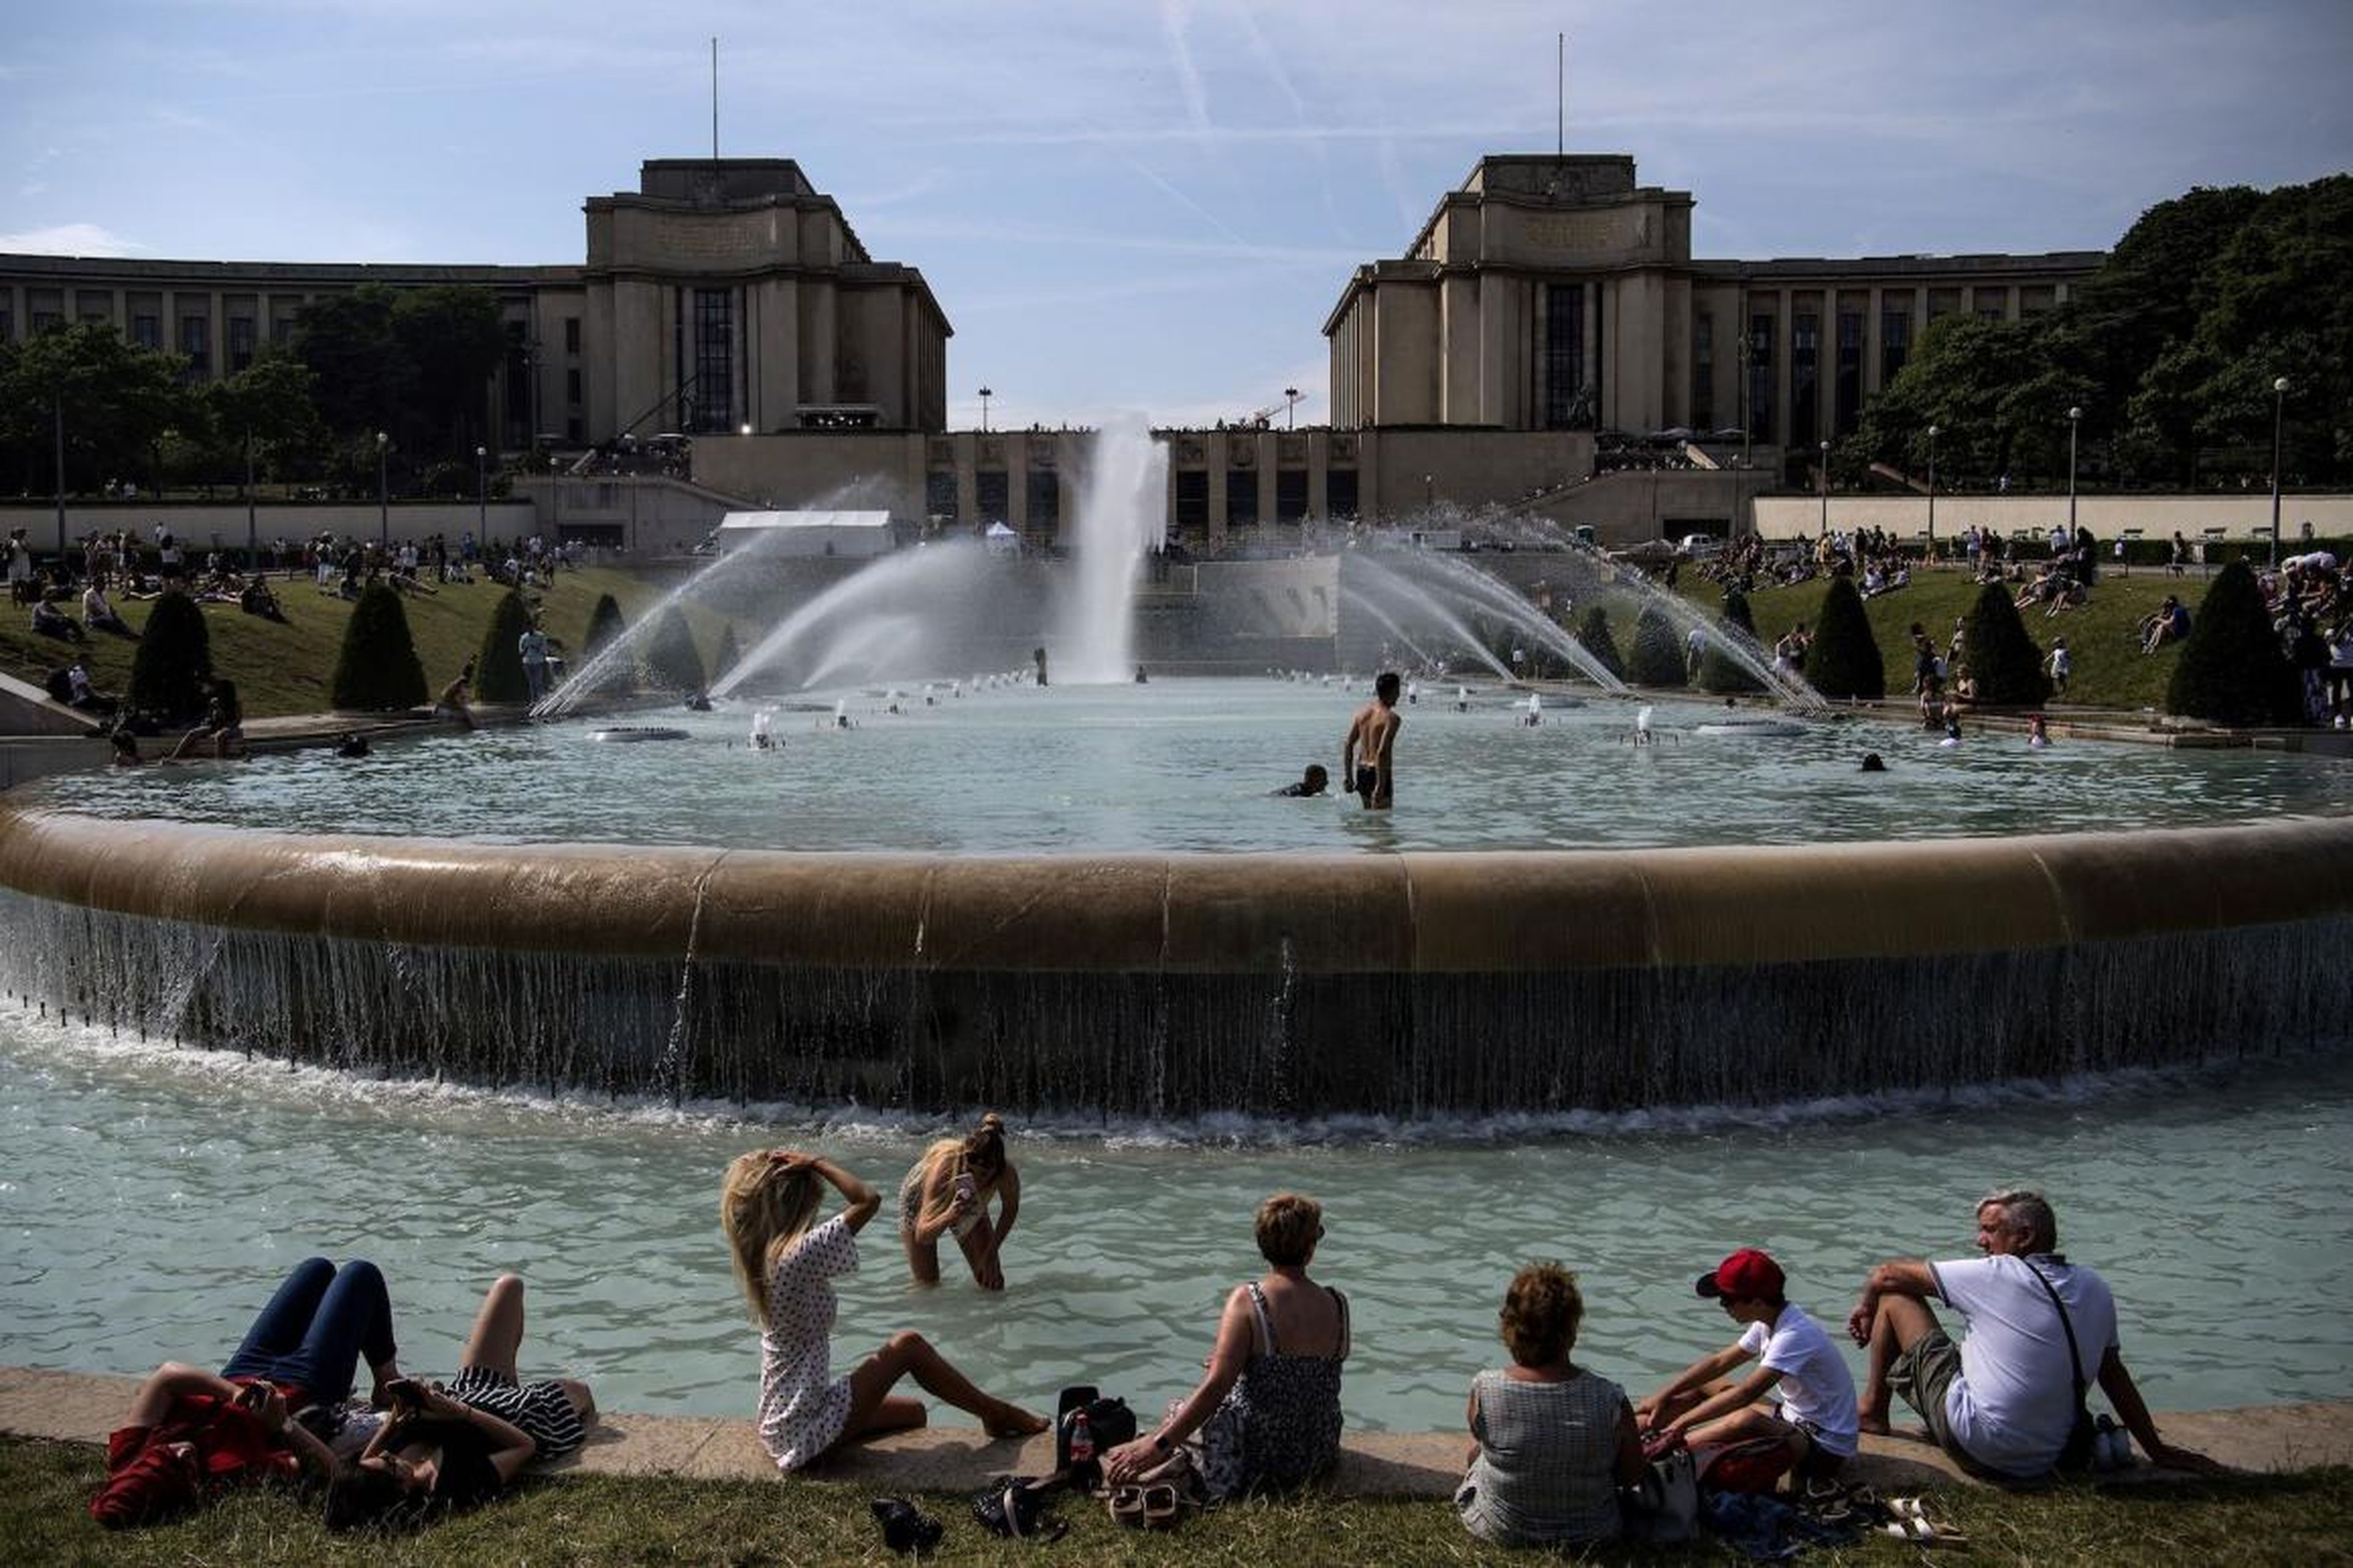 People sunbathe and cool themselves down in a pond at Paris' Trocadero esplanade on Monday as the city enters a heatwave.